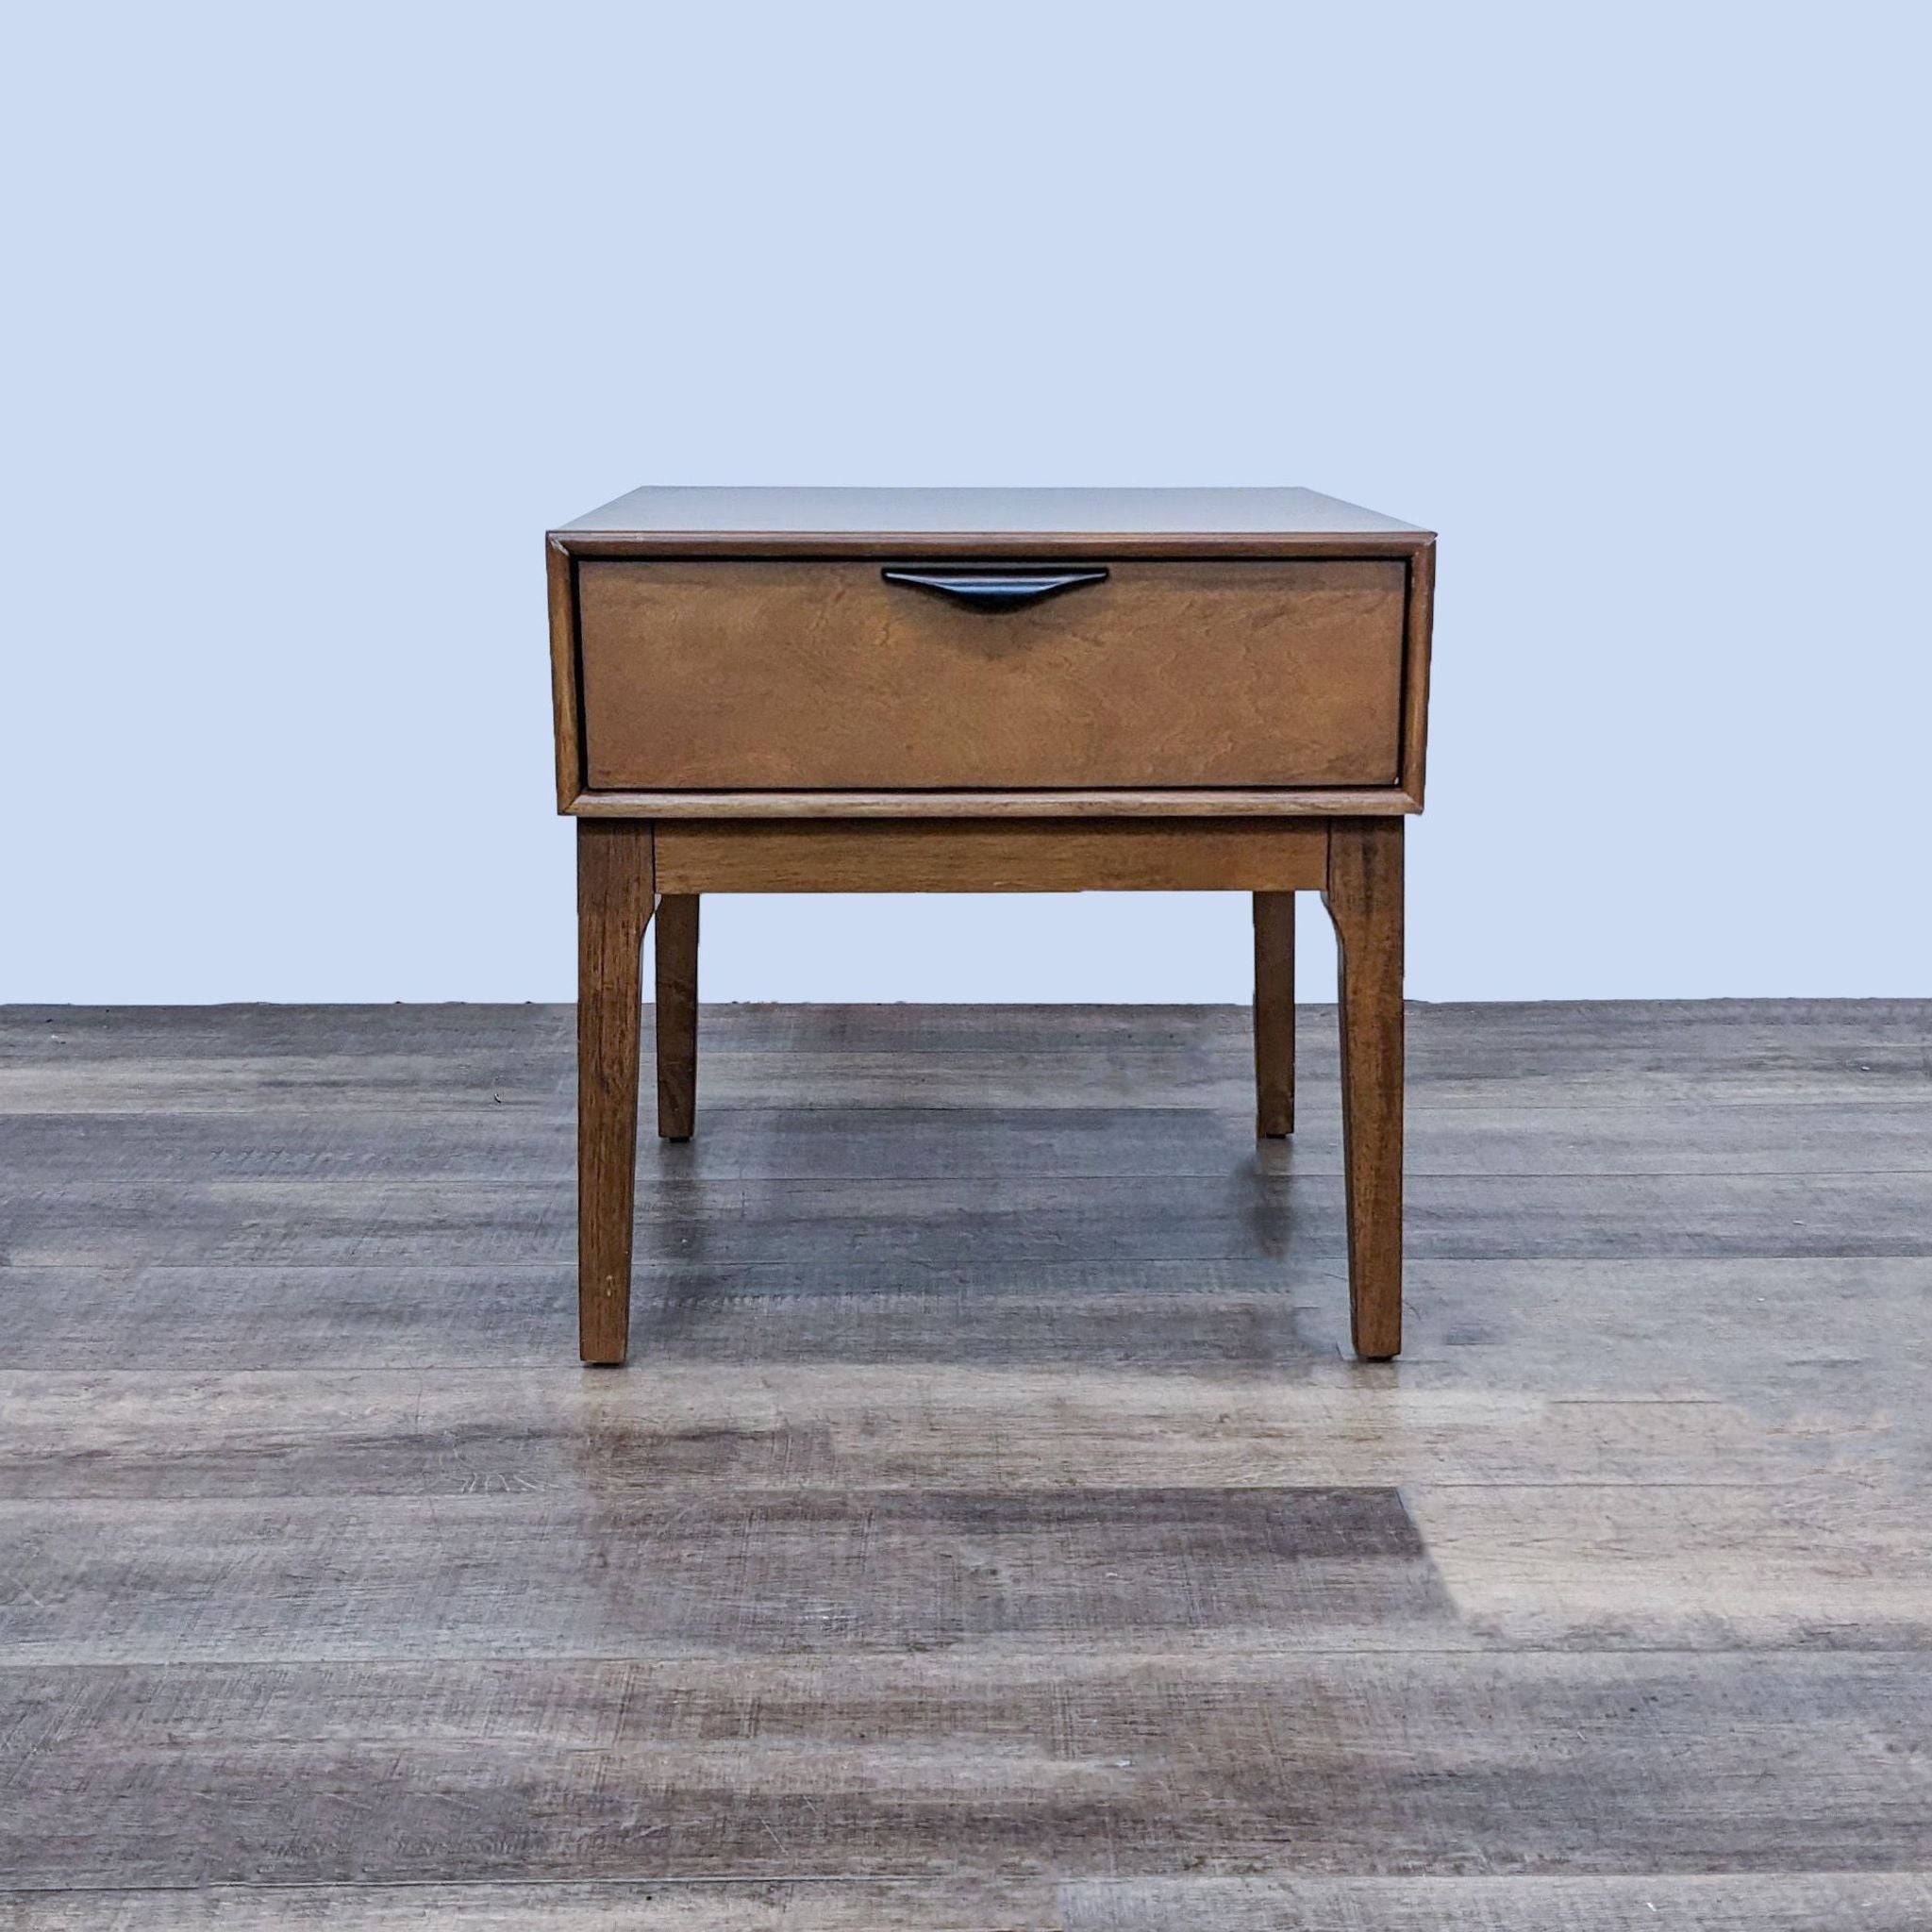 Reperch brand end table with closed drawer, wooden finish, standing on a wood textured floor against a light background.